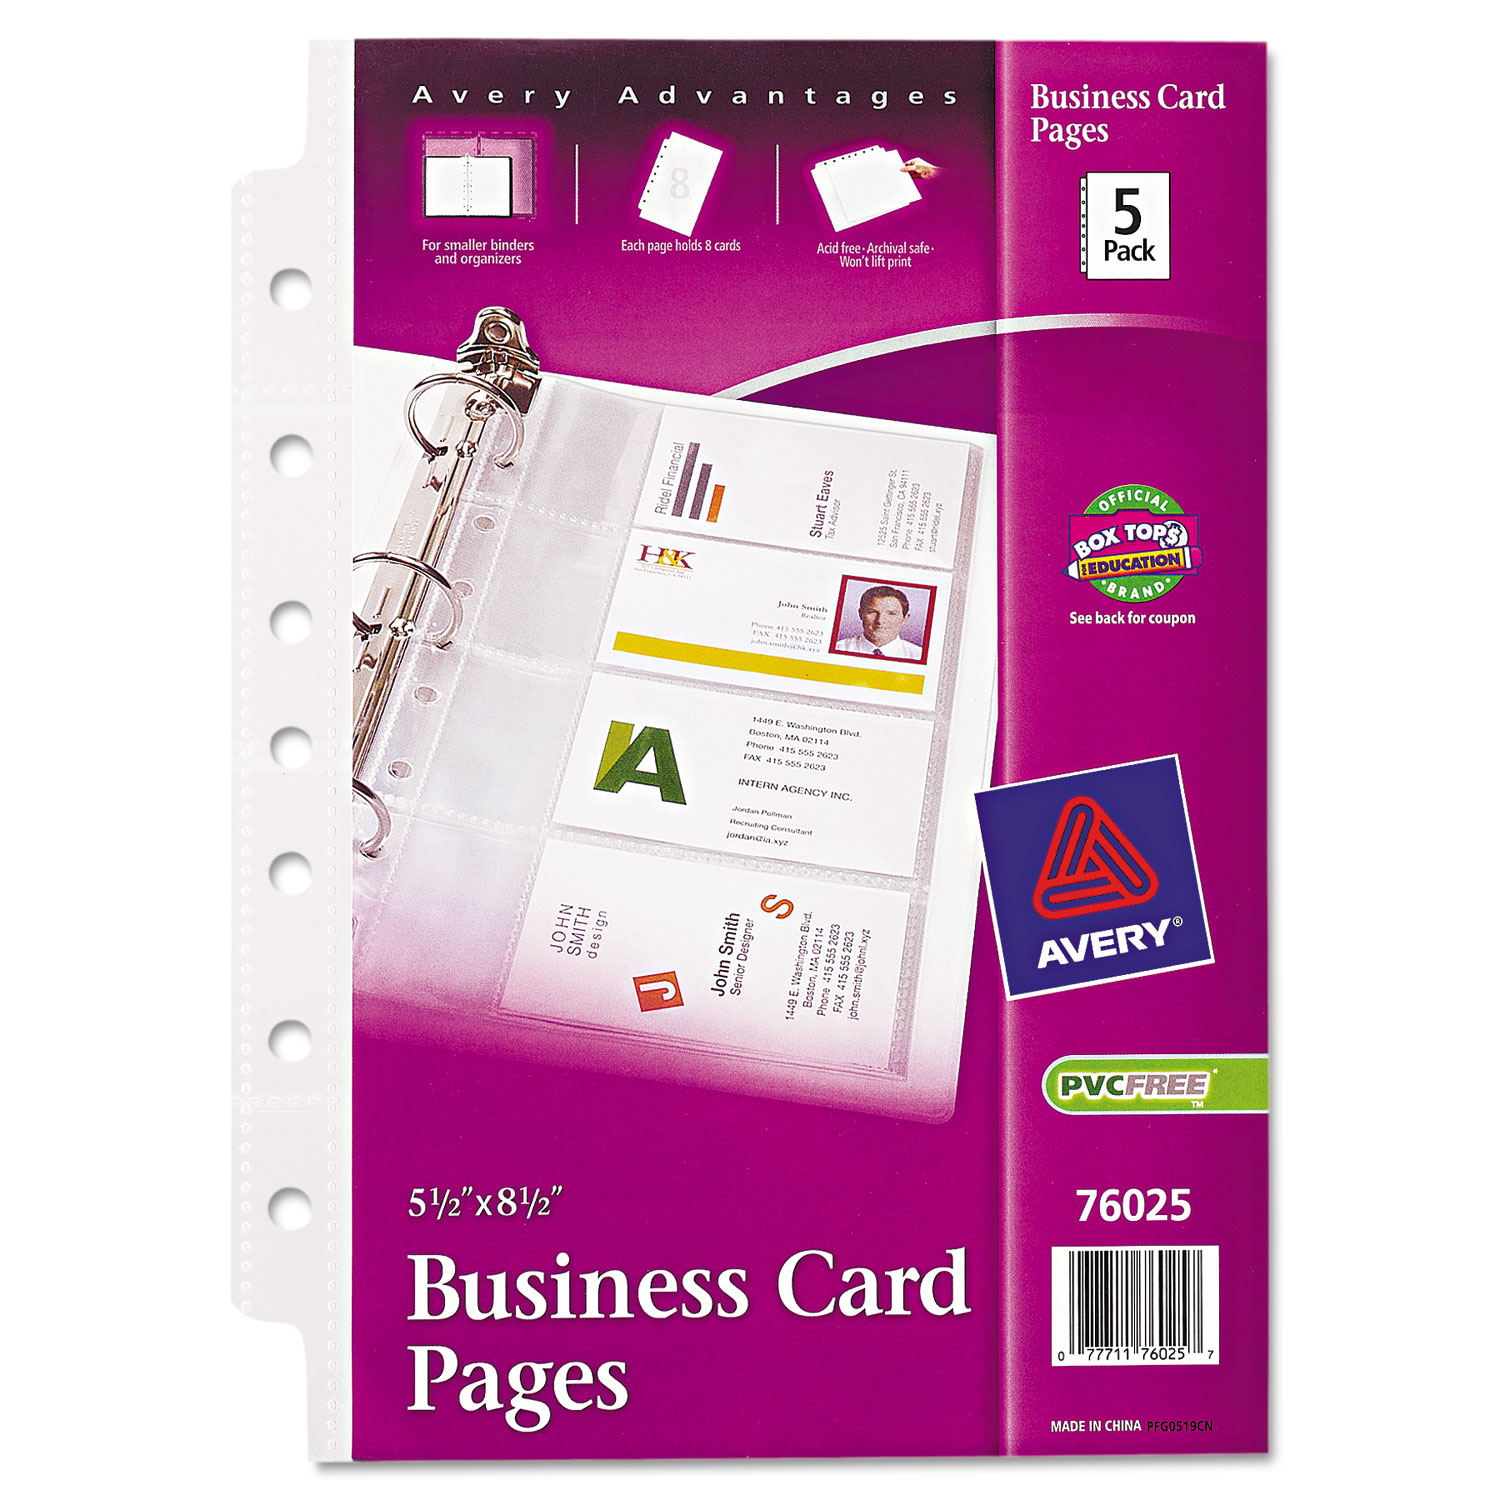  Avery 76025 Business Card Binder Pages, 2 x 3 1/2, 8 Cards/Sheet, 5 Pages/Pack (AVE76025) 